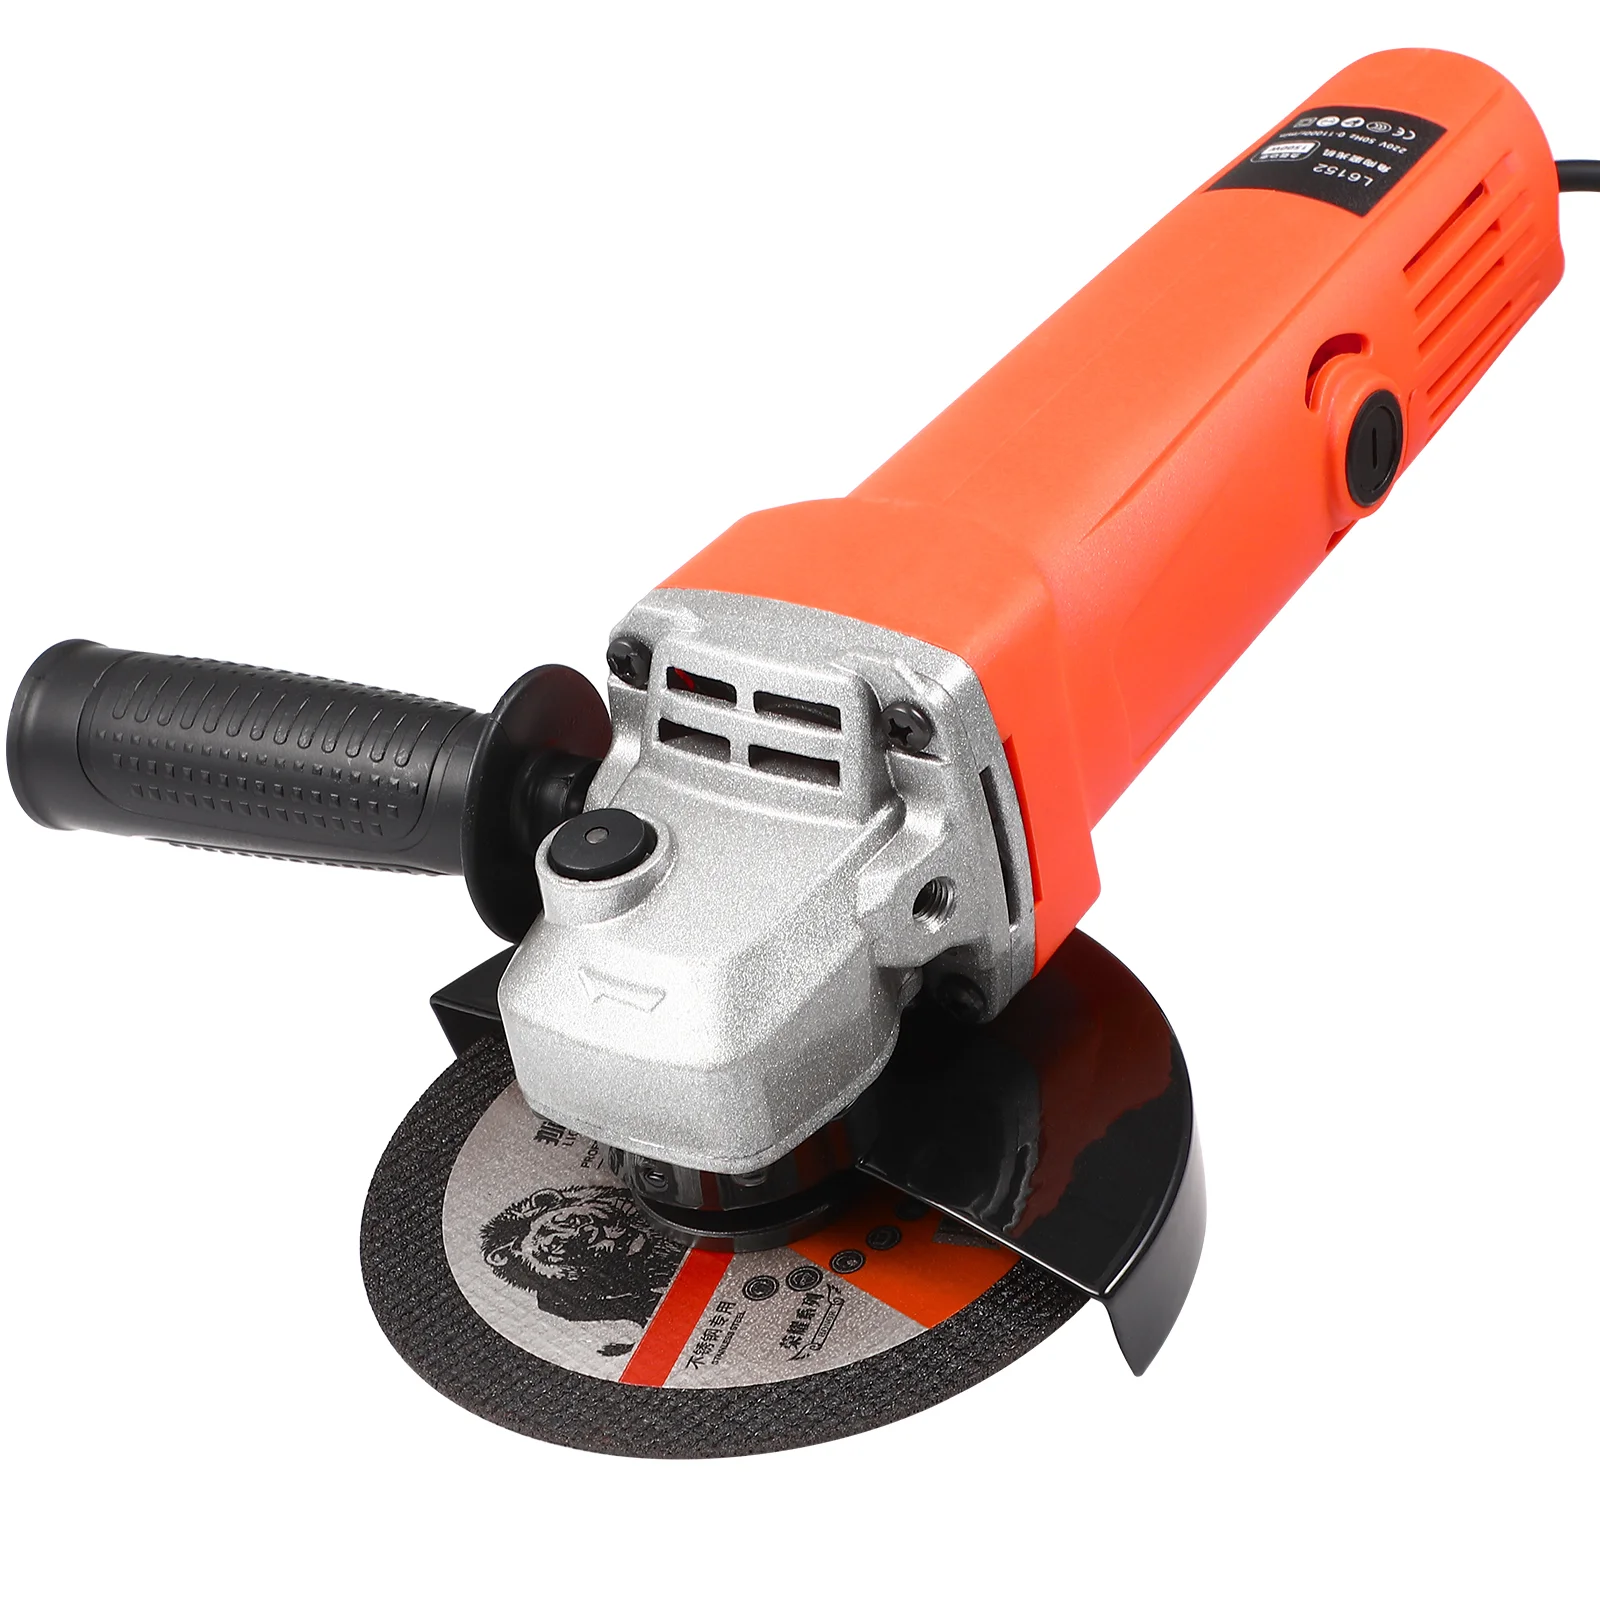 

Handheld Electric Angle Grinder with Grinding Wheels for Grinding Woodwork 55H Motor with EU Plug